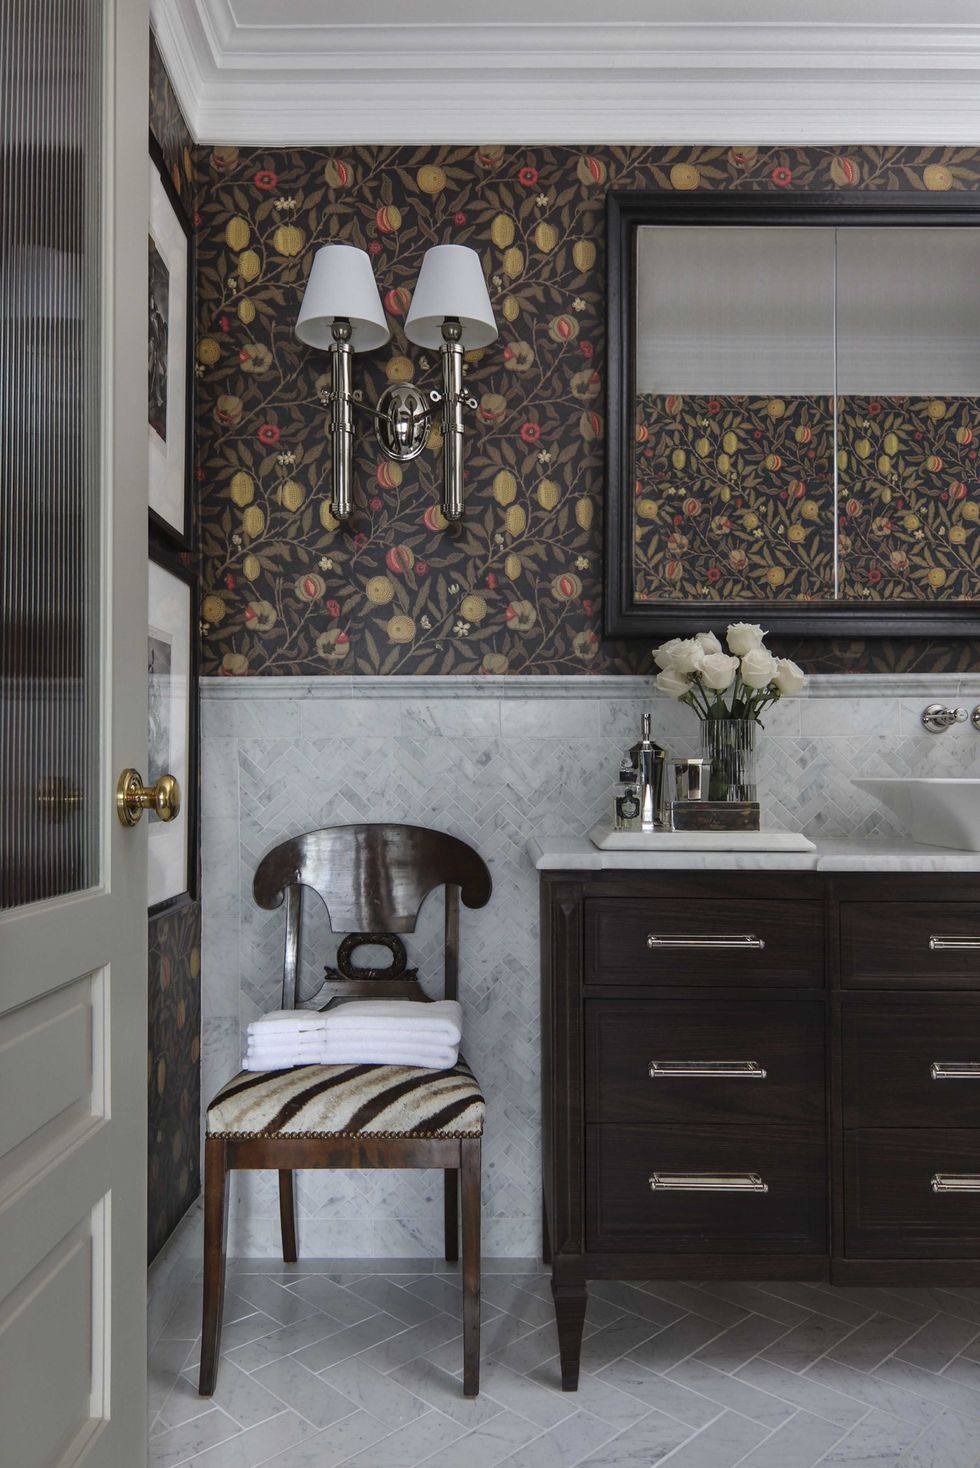 bathroom, wooden cabinets, marble tiling on floor and walls, floral wallpaper, sconces